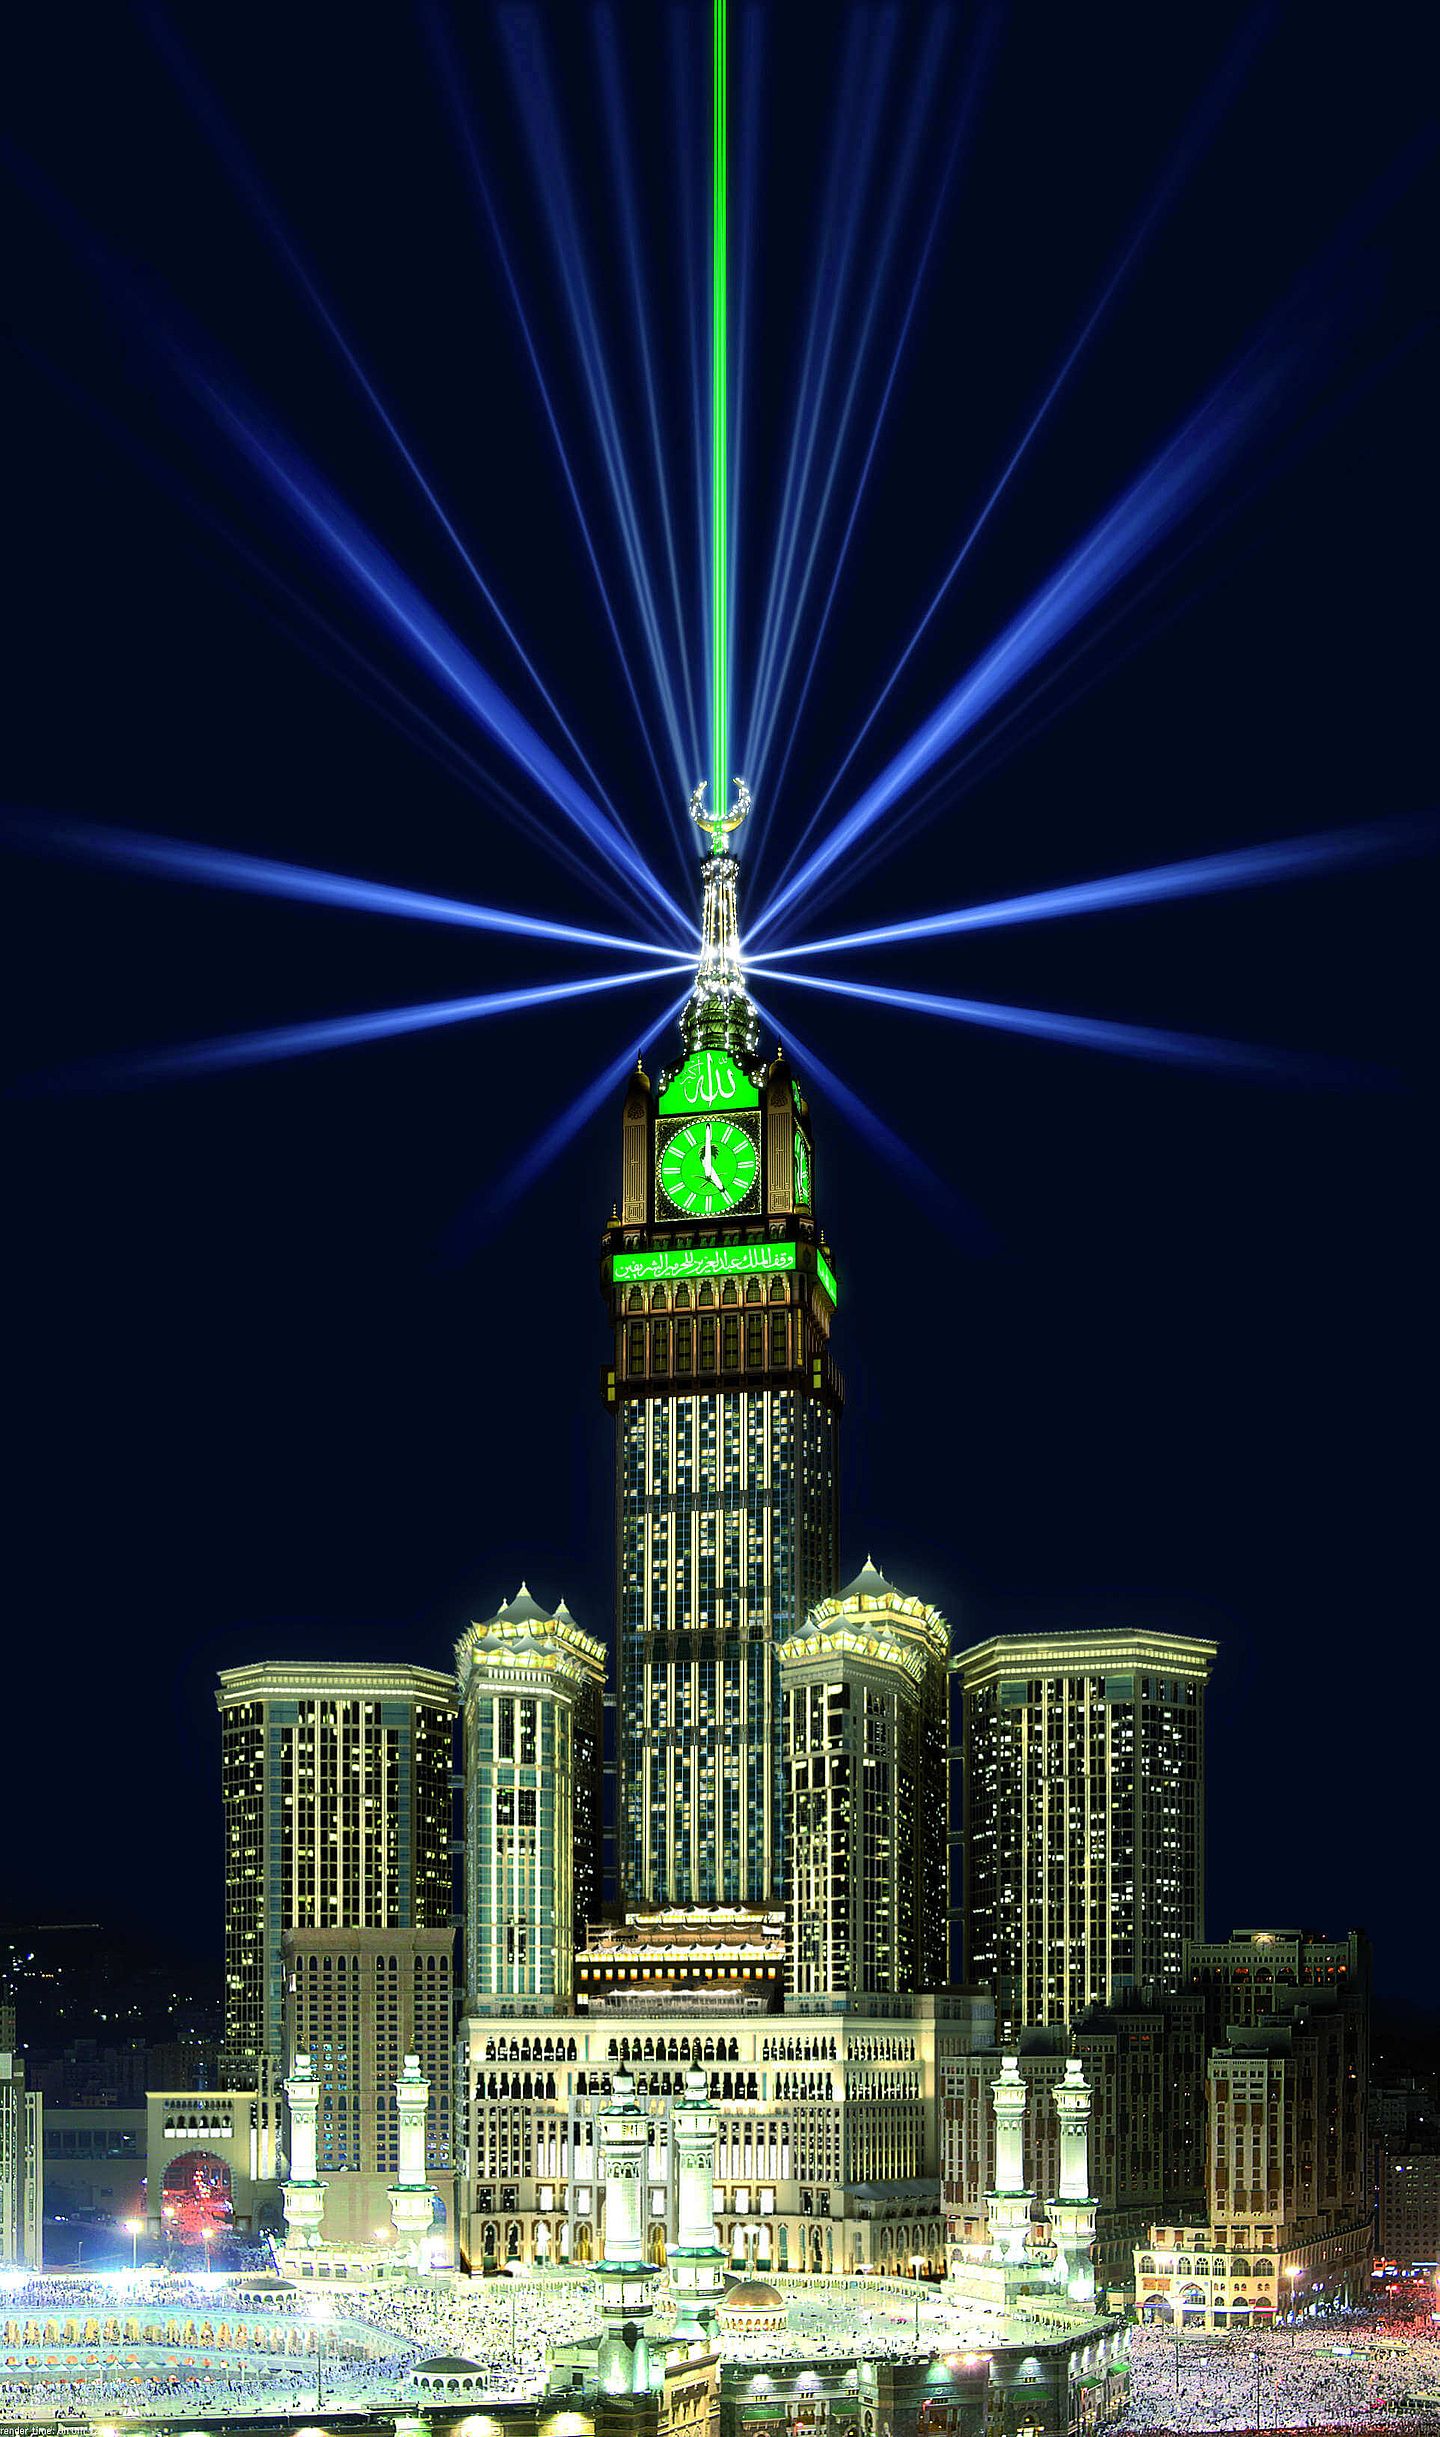 Royal Clock Tower in Mecca